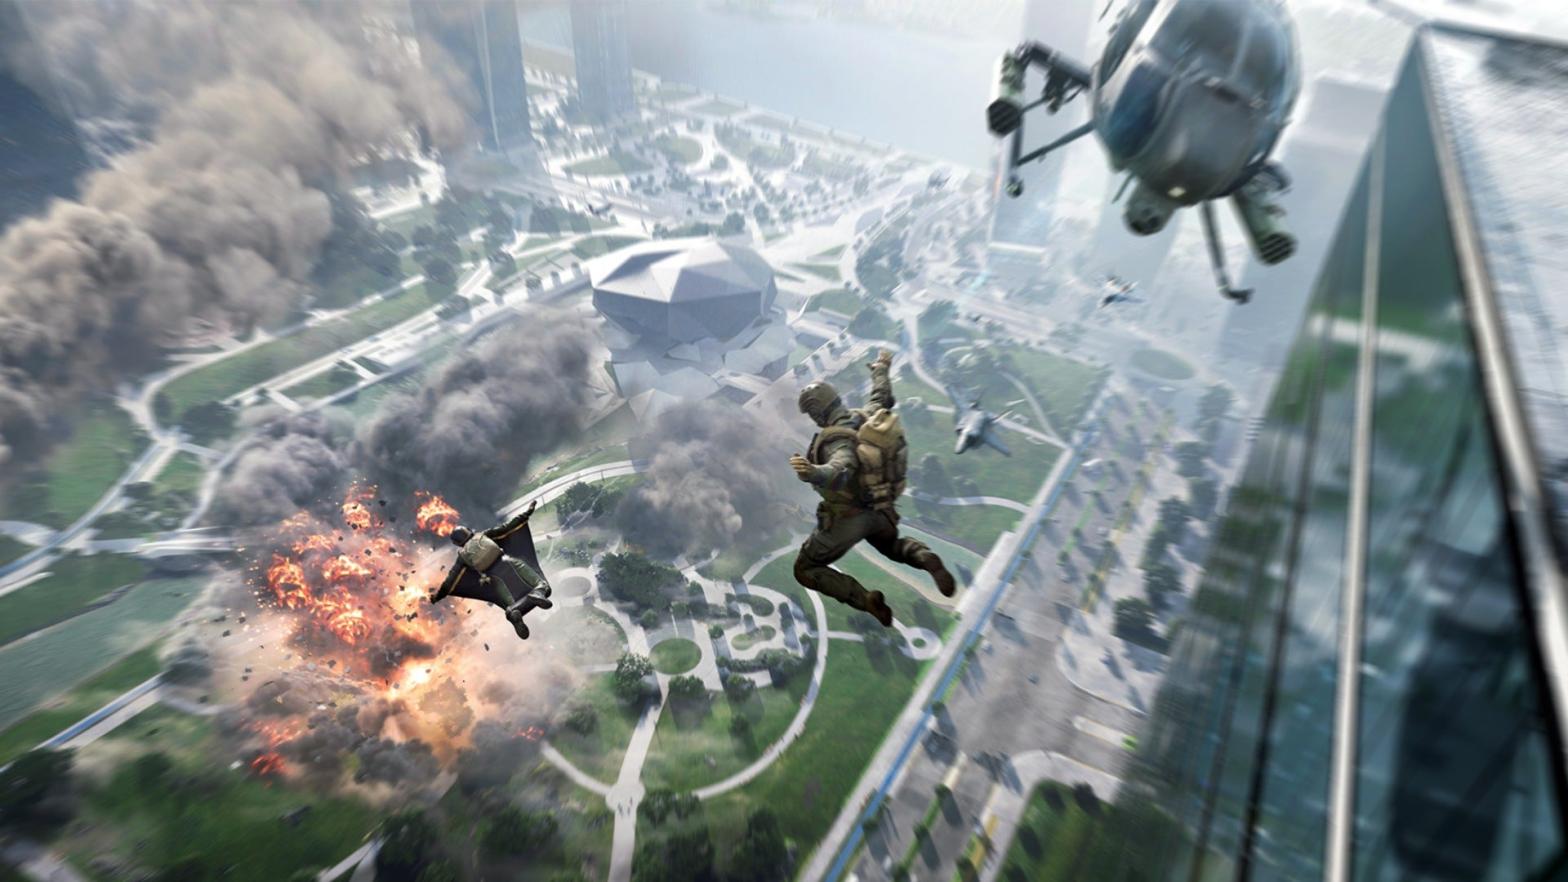 Angry Battlefield 2042 gamers are out to blow up the entire subreddit. (Image: EA / DICE)